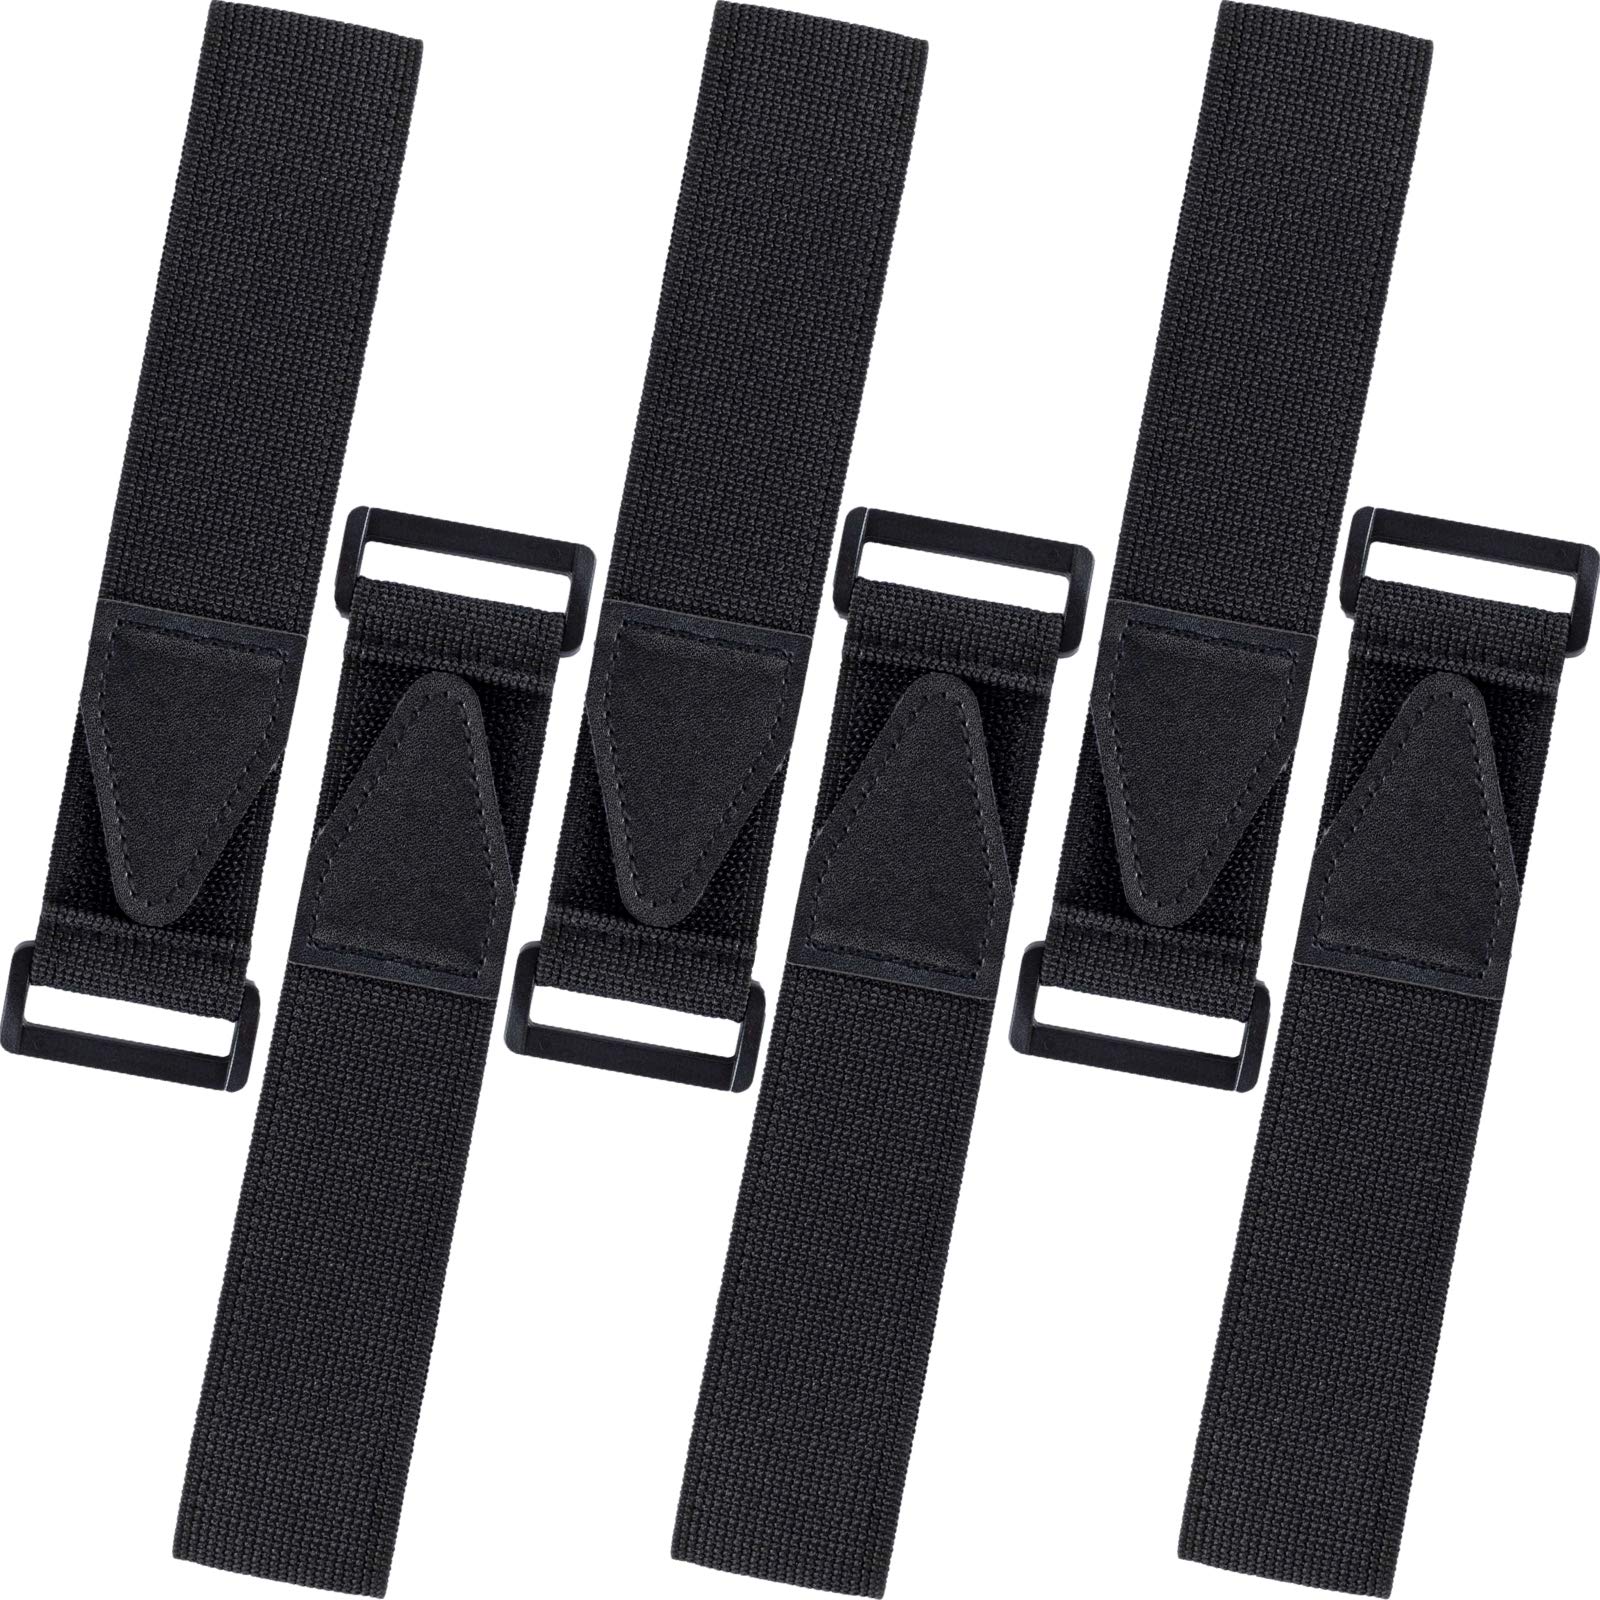 6 Pcs Bicycle Pant Leg Straps Adjustable Cycling Ankle Safety Band Multipurpose Black Elastic Magic Fastening Belt with Buckle for Riding Climbing Fishing Outdoor Sports (1.5”x13.8”)